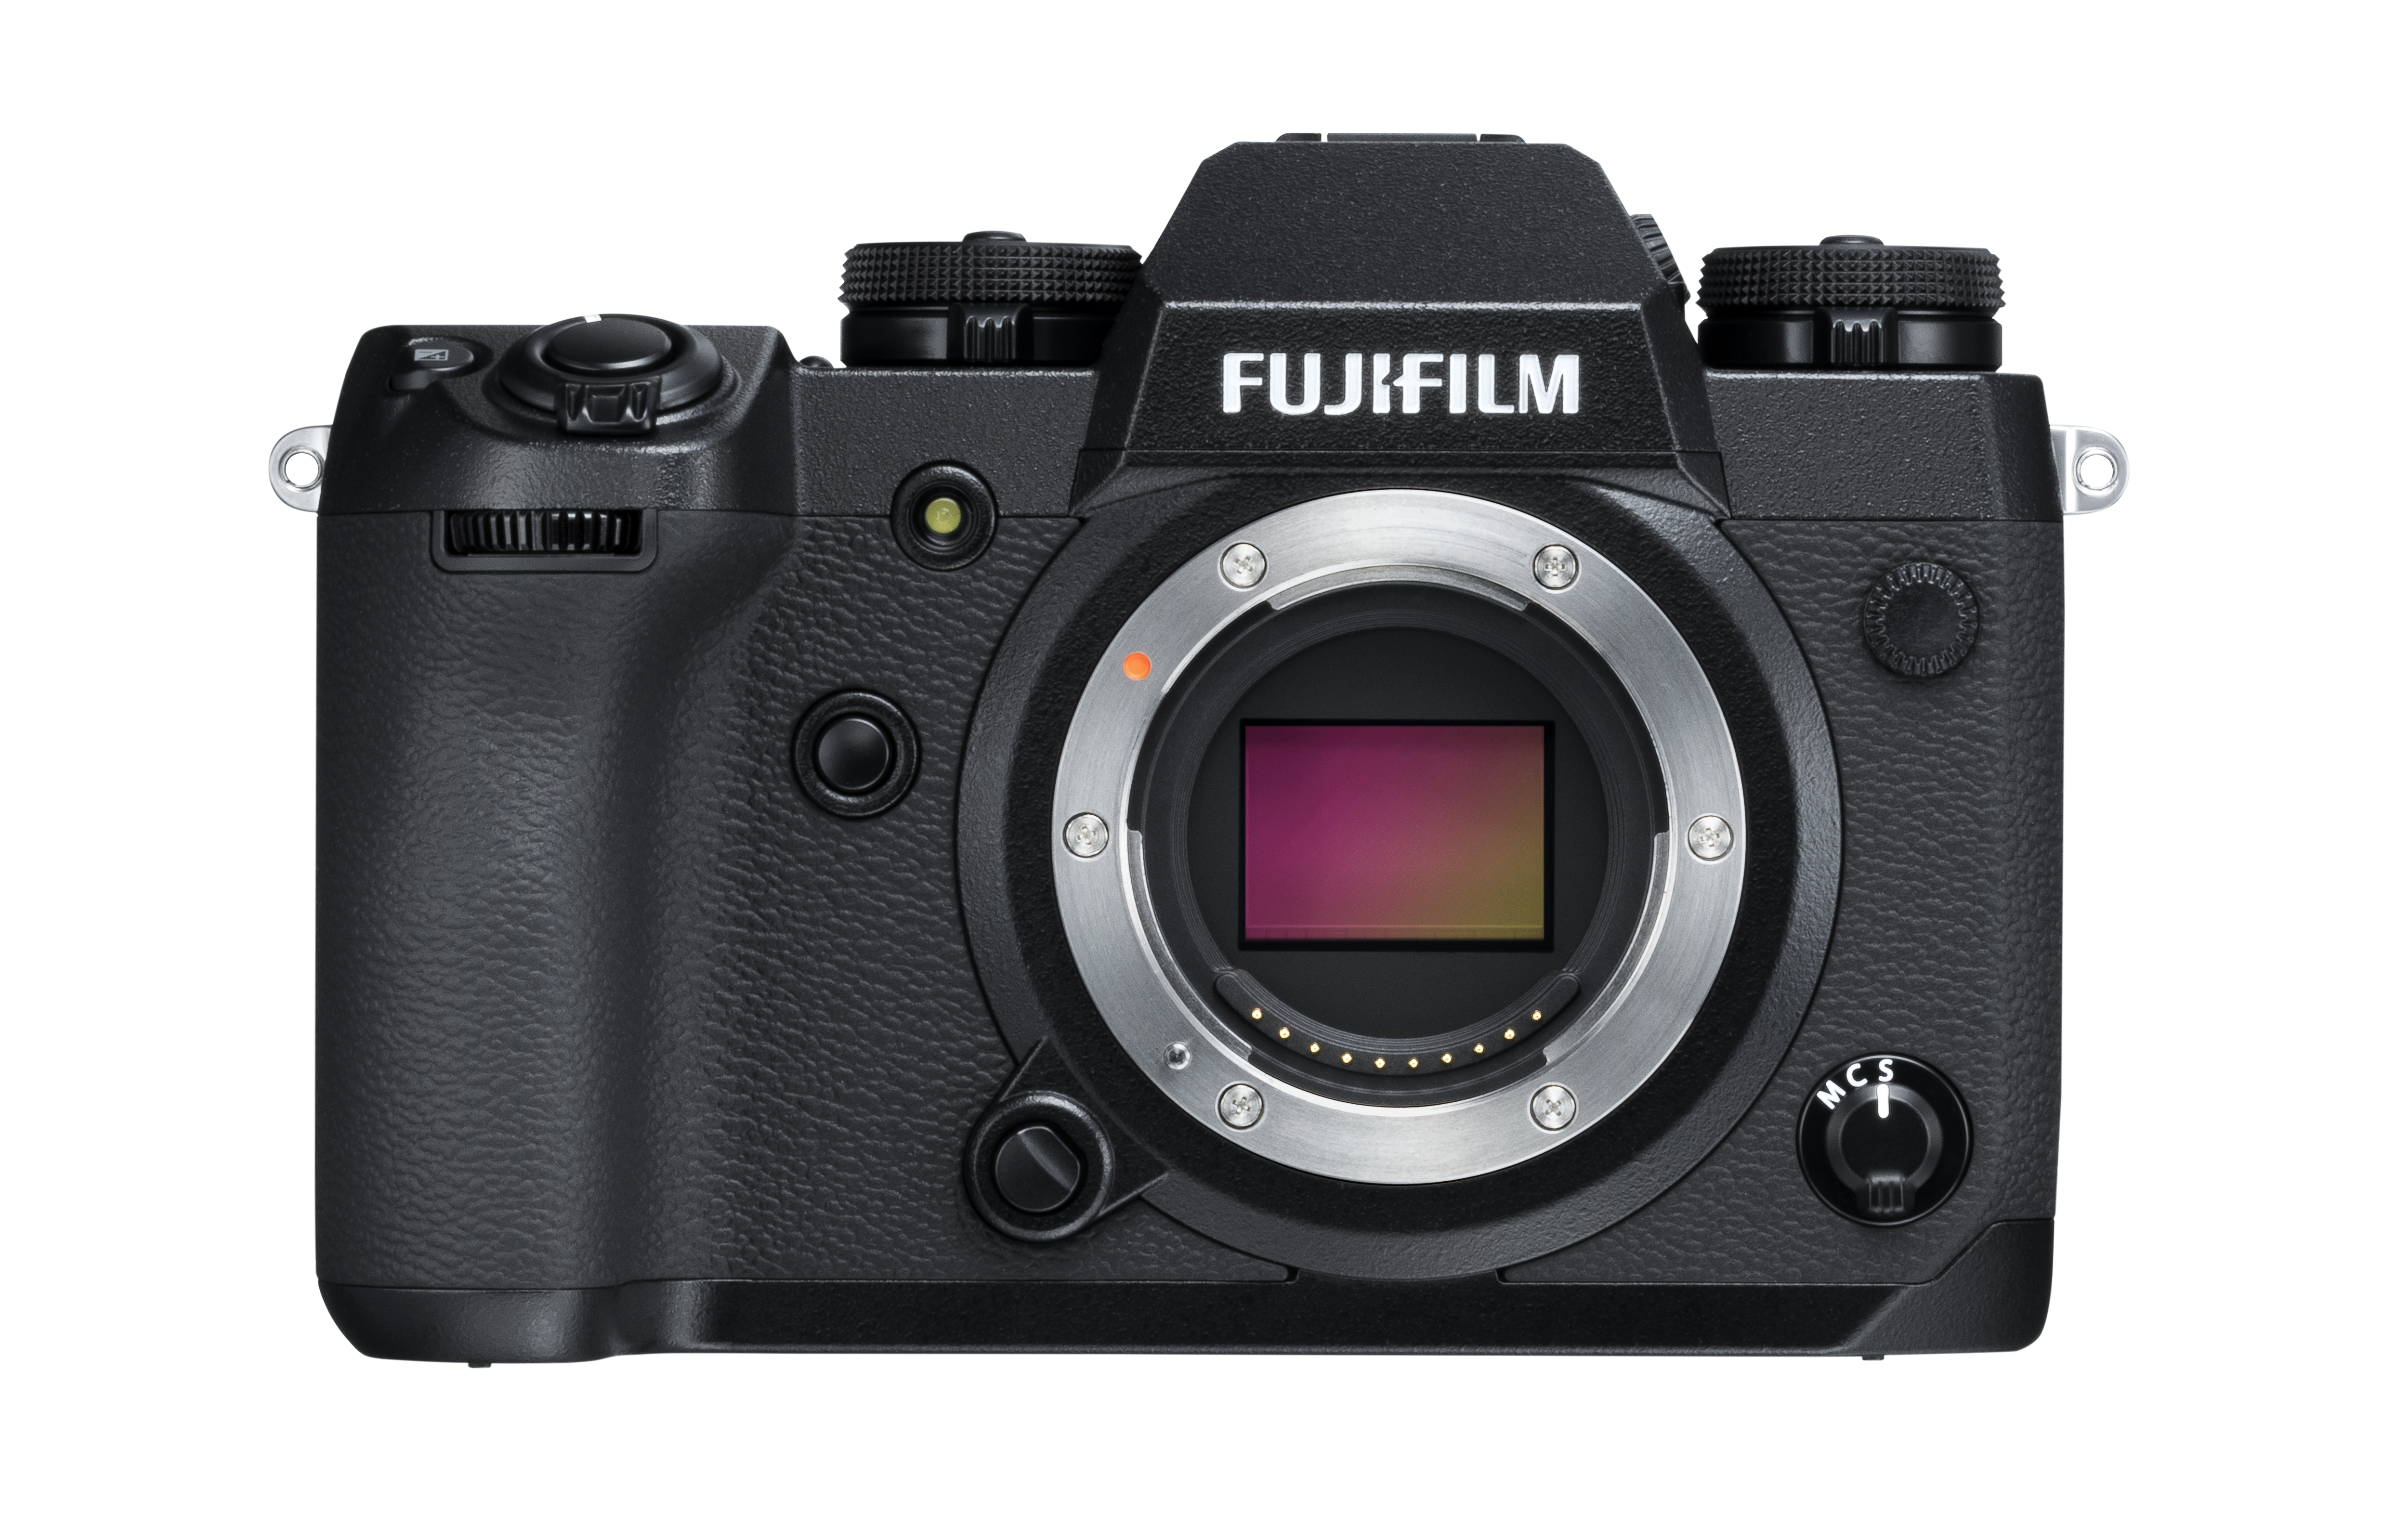 Just Announced: Meet the Brand New Fujifilm X-H1 Mirrorless Camera at Orms, South Africa